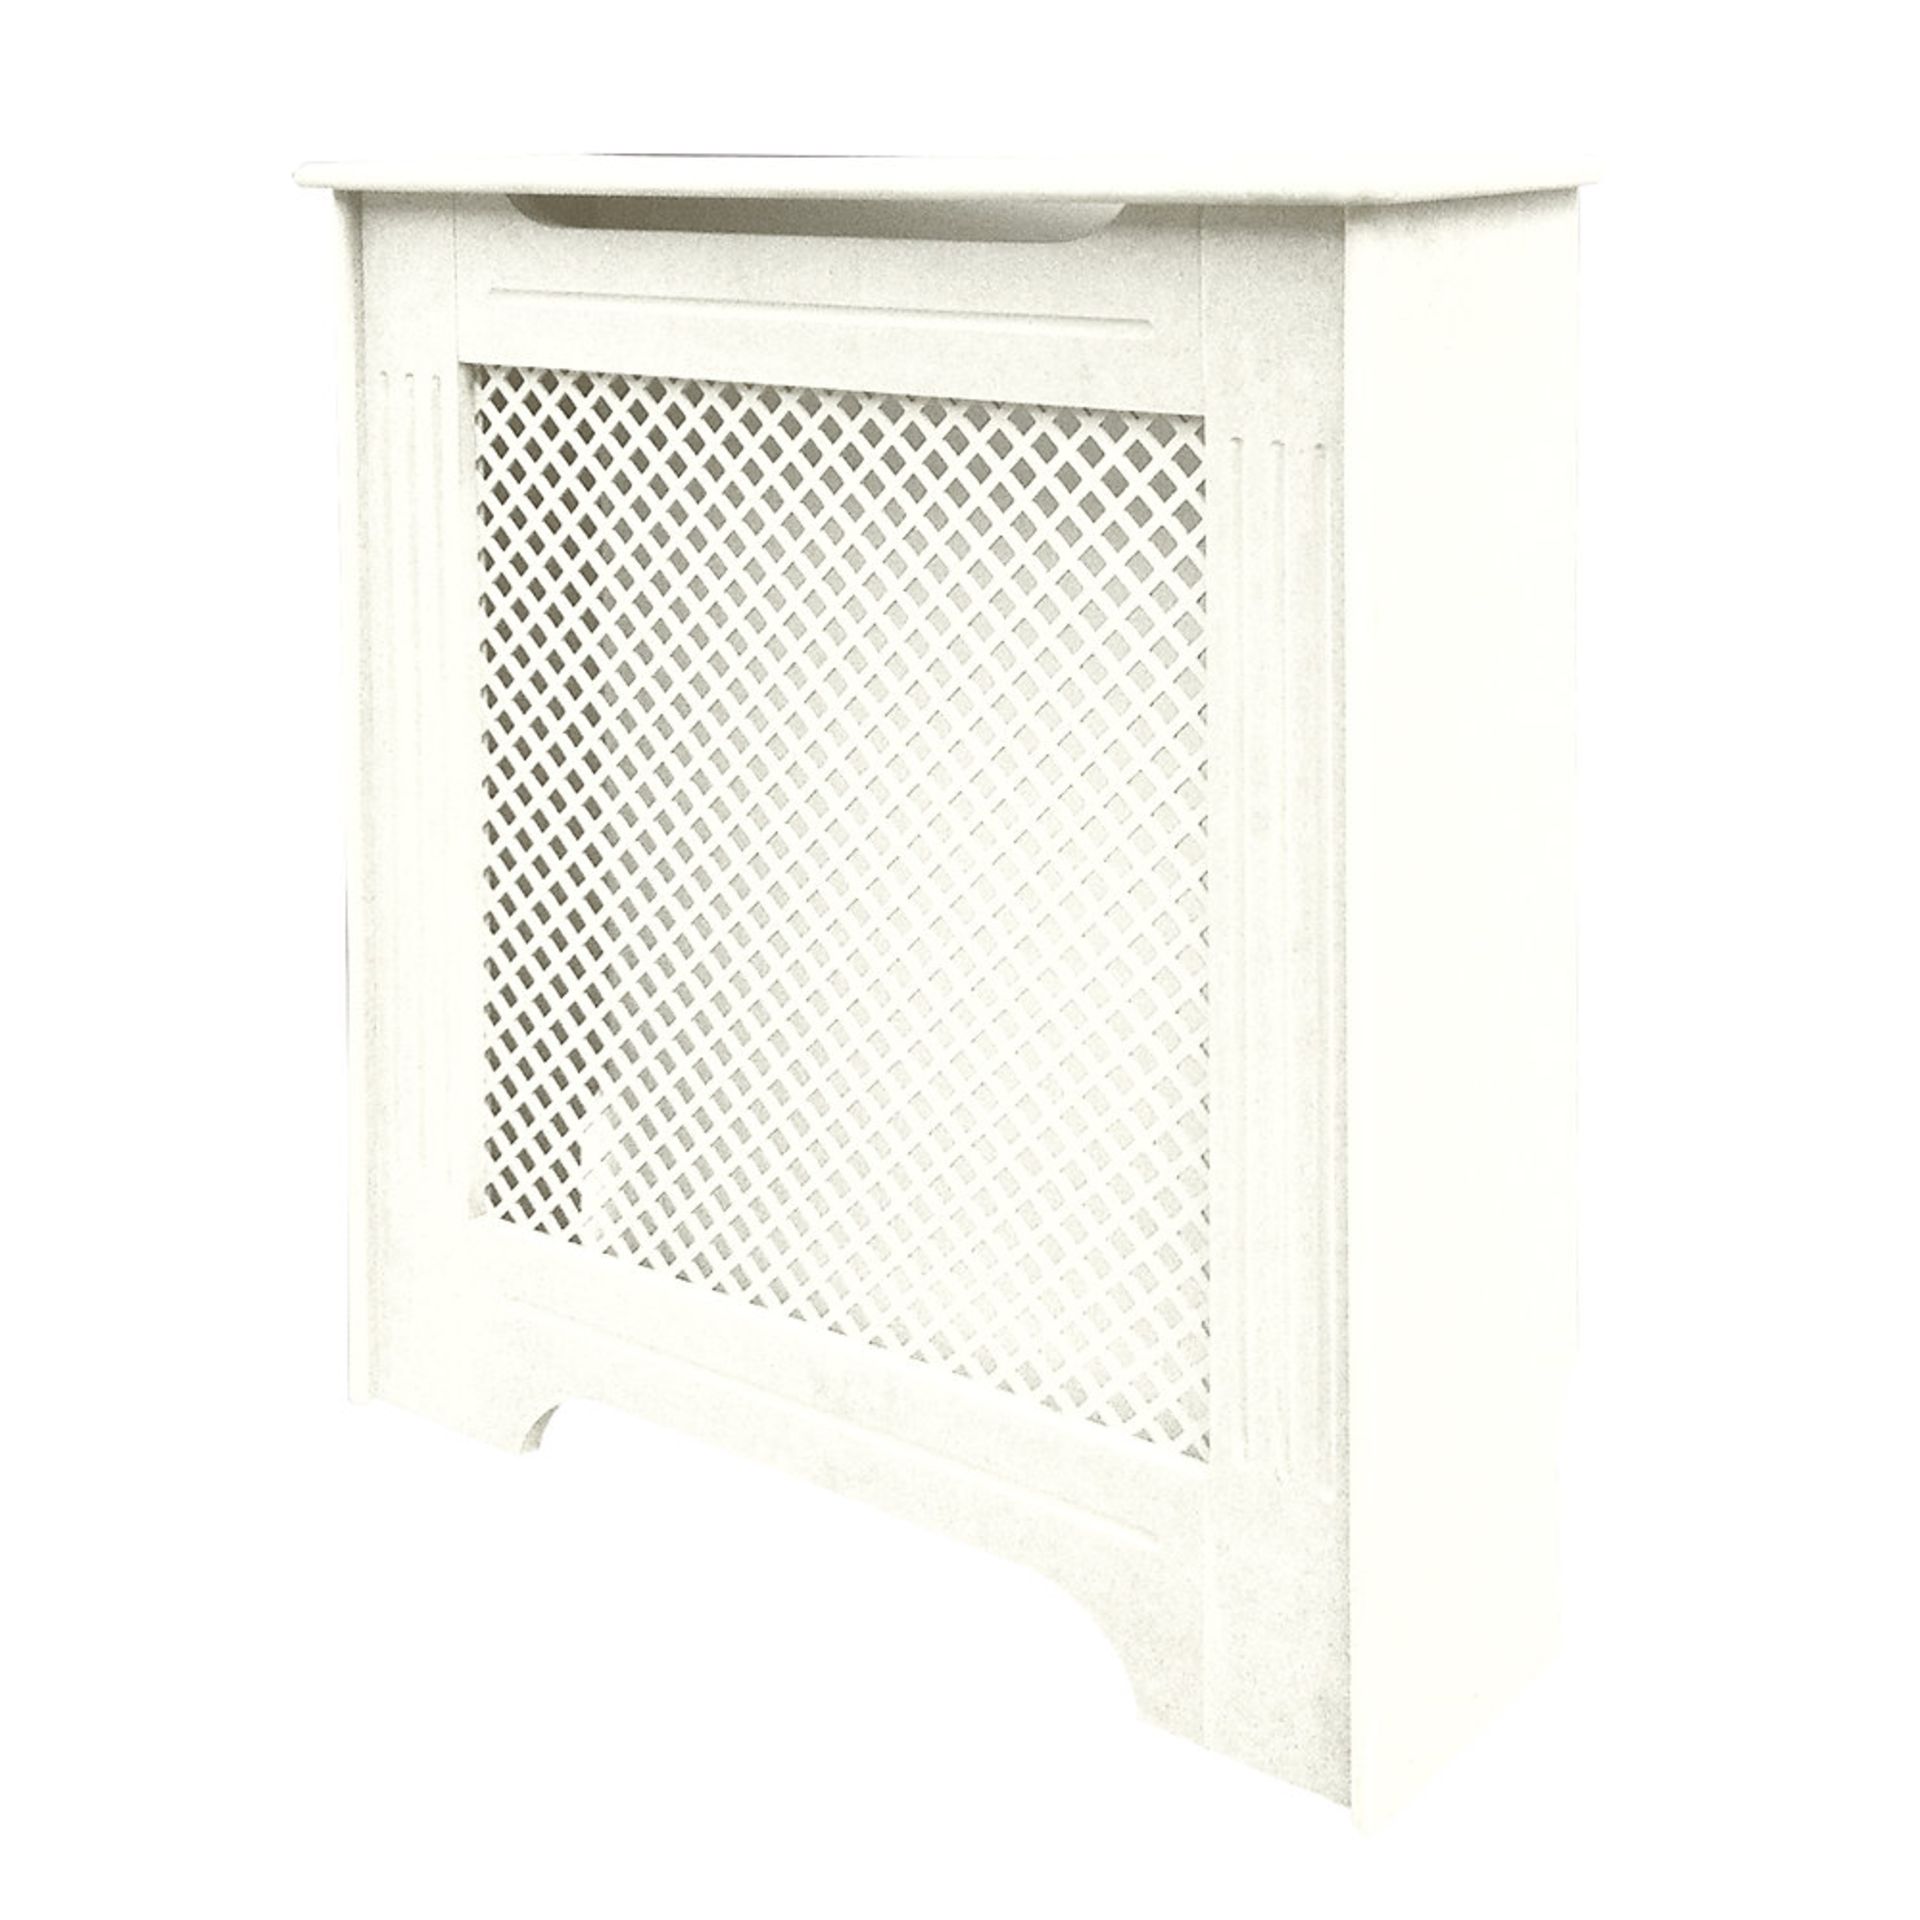 (UK242) 820 X 210 X 868MM VICTORIAN RADIATOR CABINET WHITE. White finish. Provides a practical